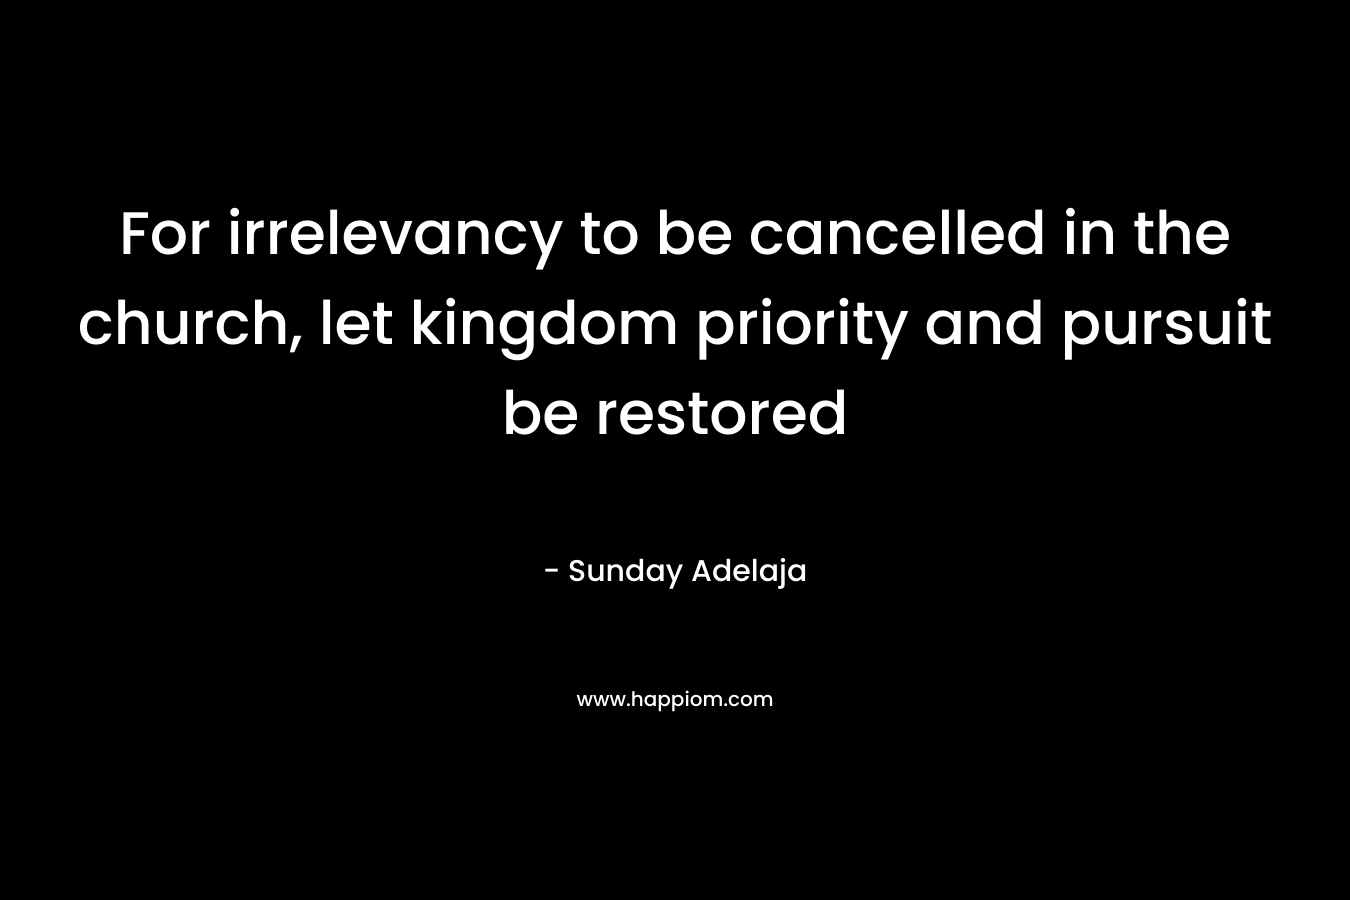 For irrelevancy to be cancelled in the church, let kingdom priority and pursuit be restored